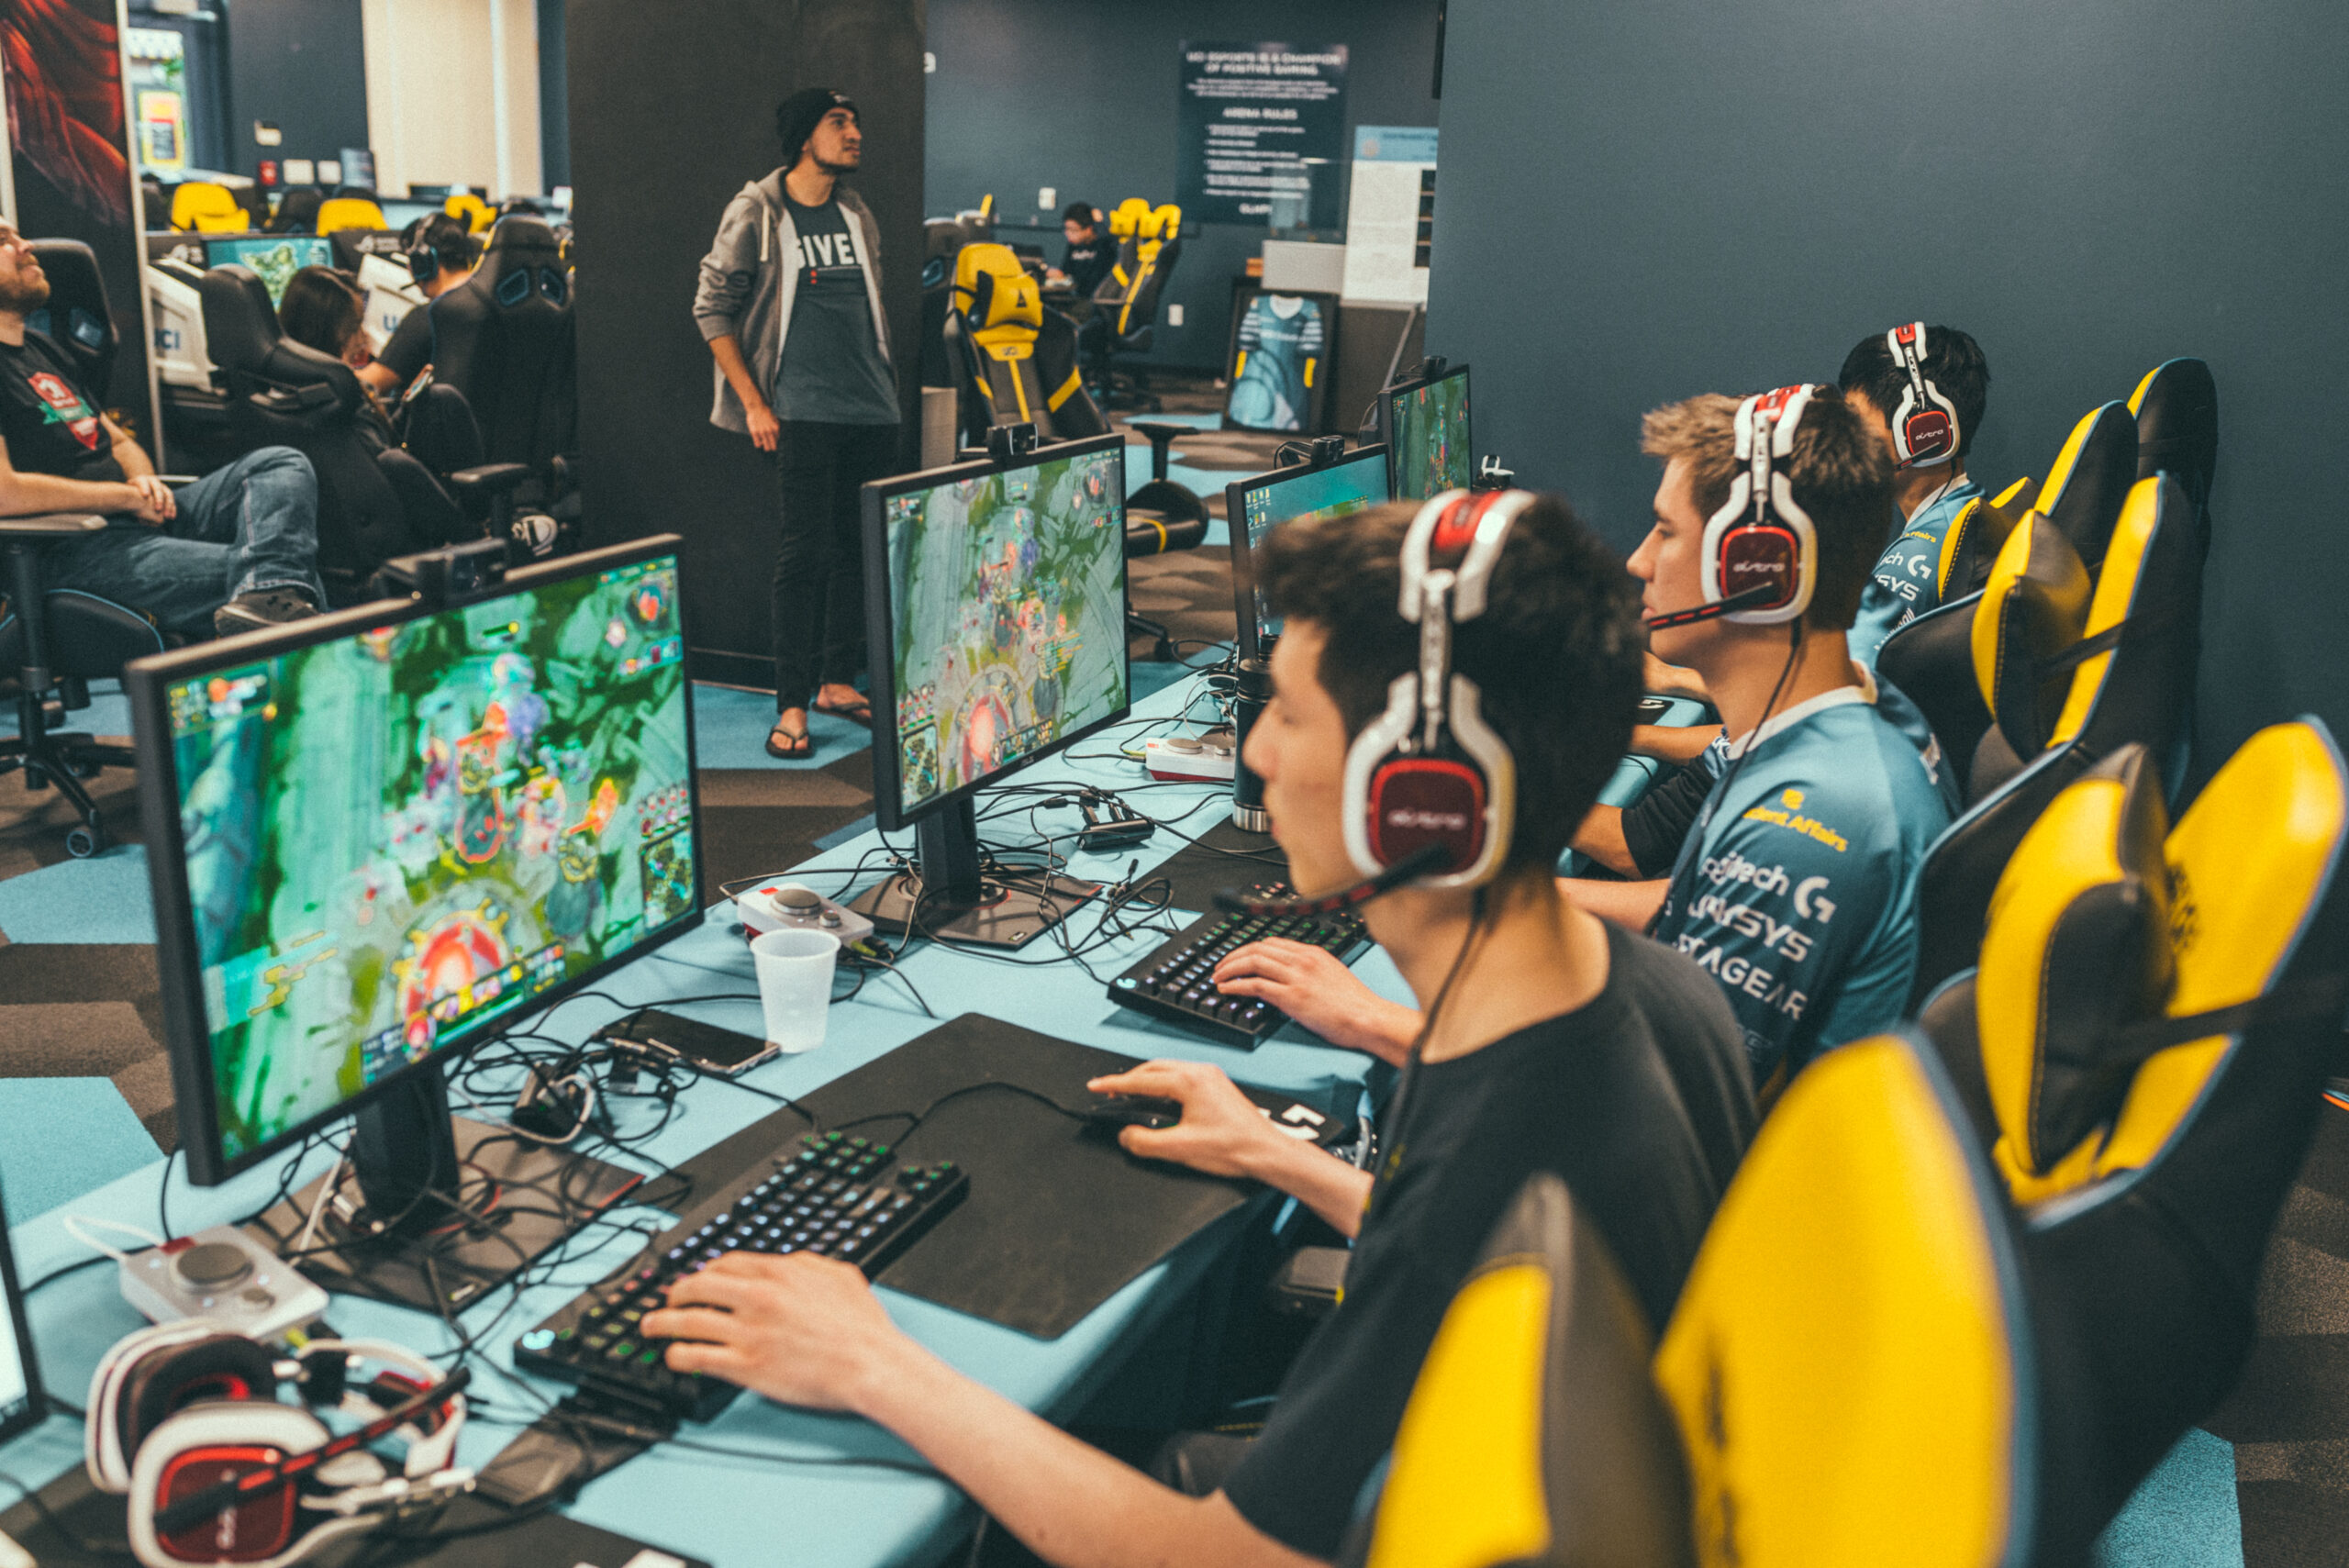 A sponsor has provided the University of California, Irvine's esports teams with some exercise equipment for players who want to more than stretch during breaks. 